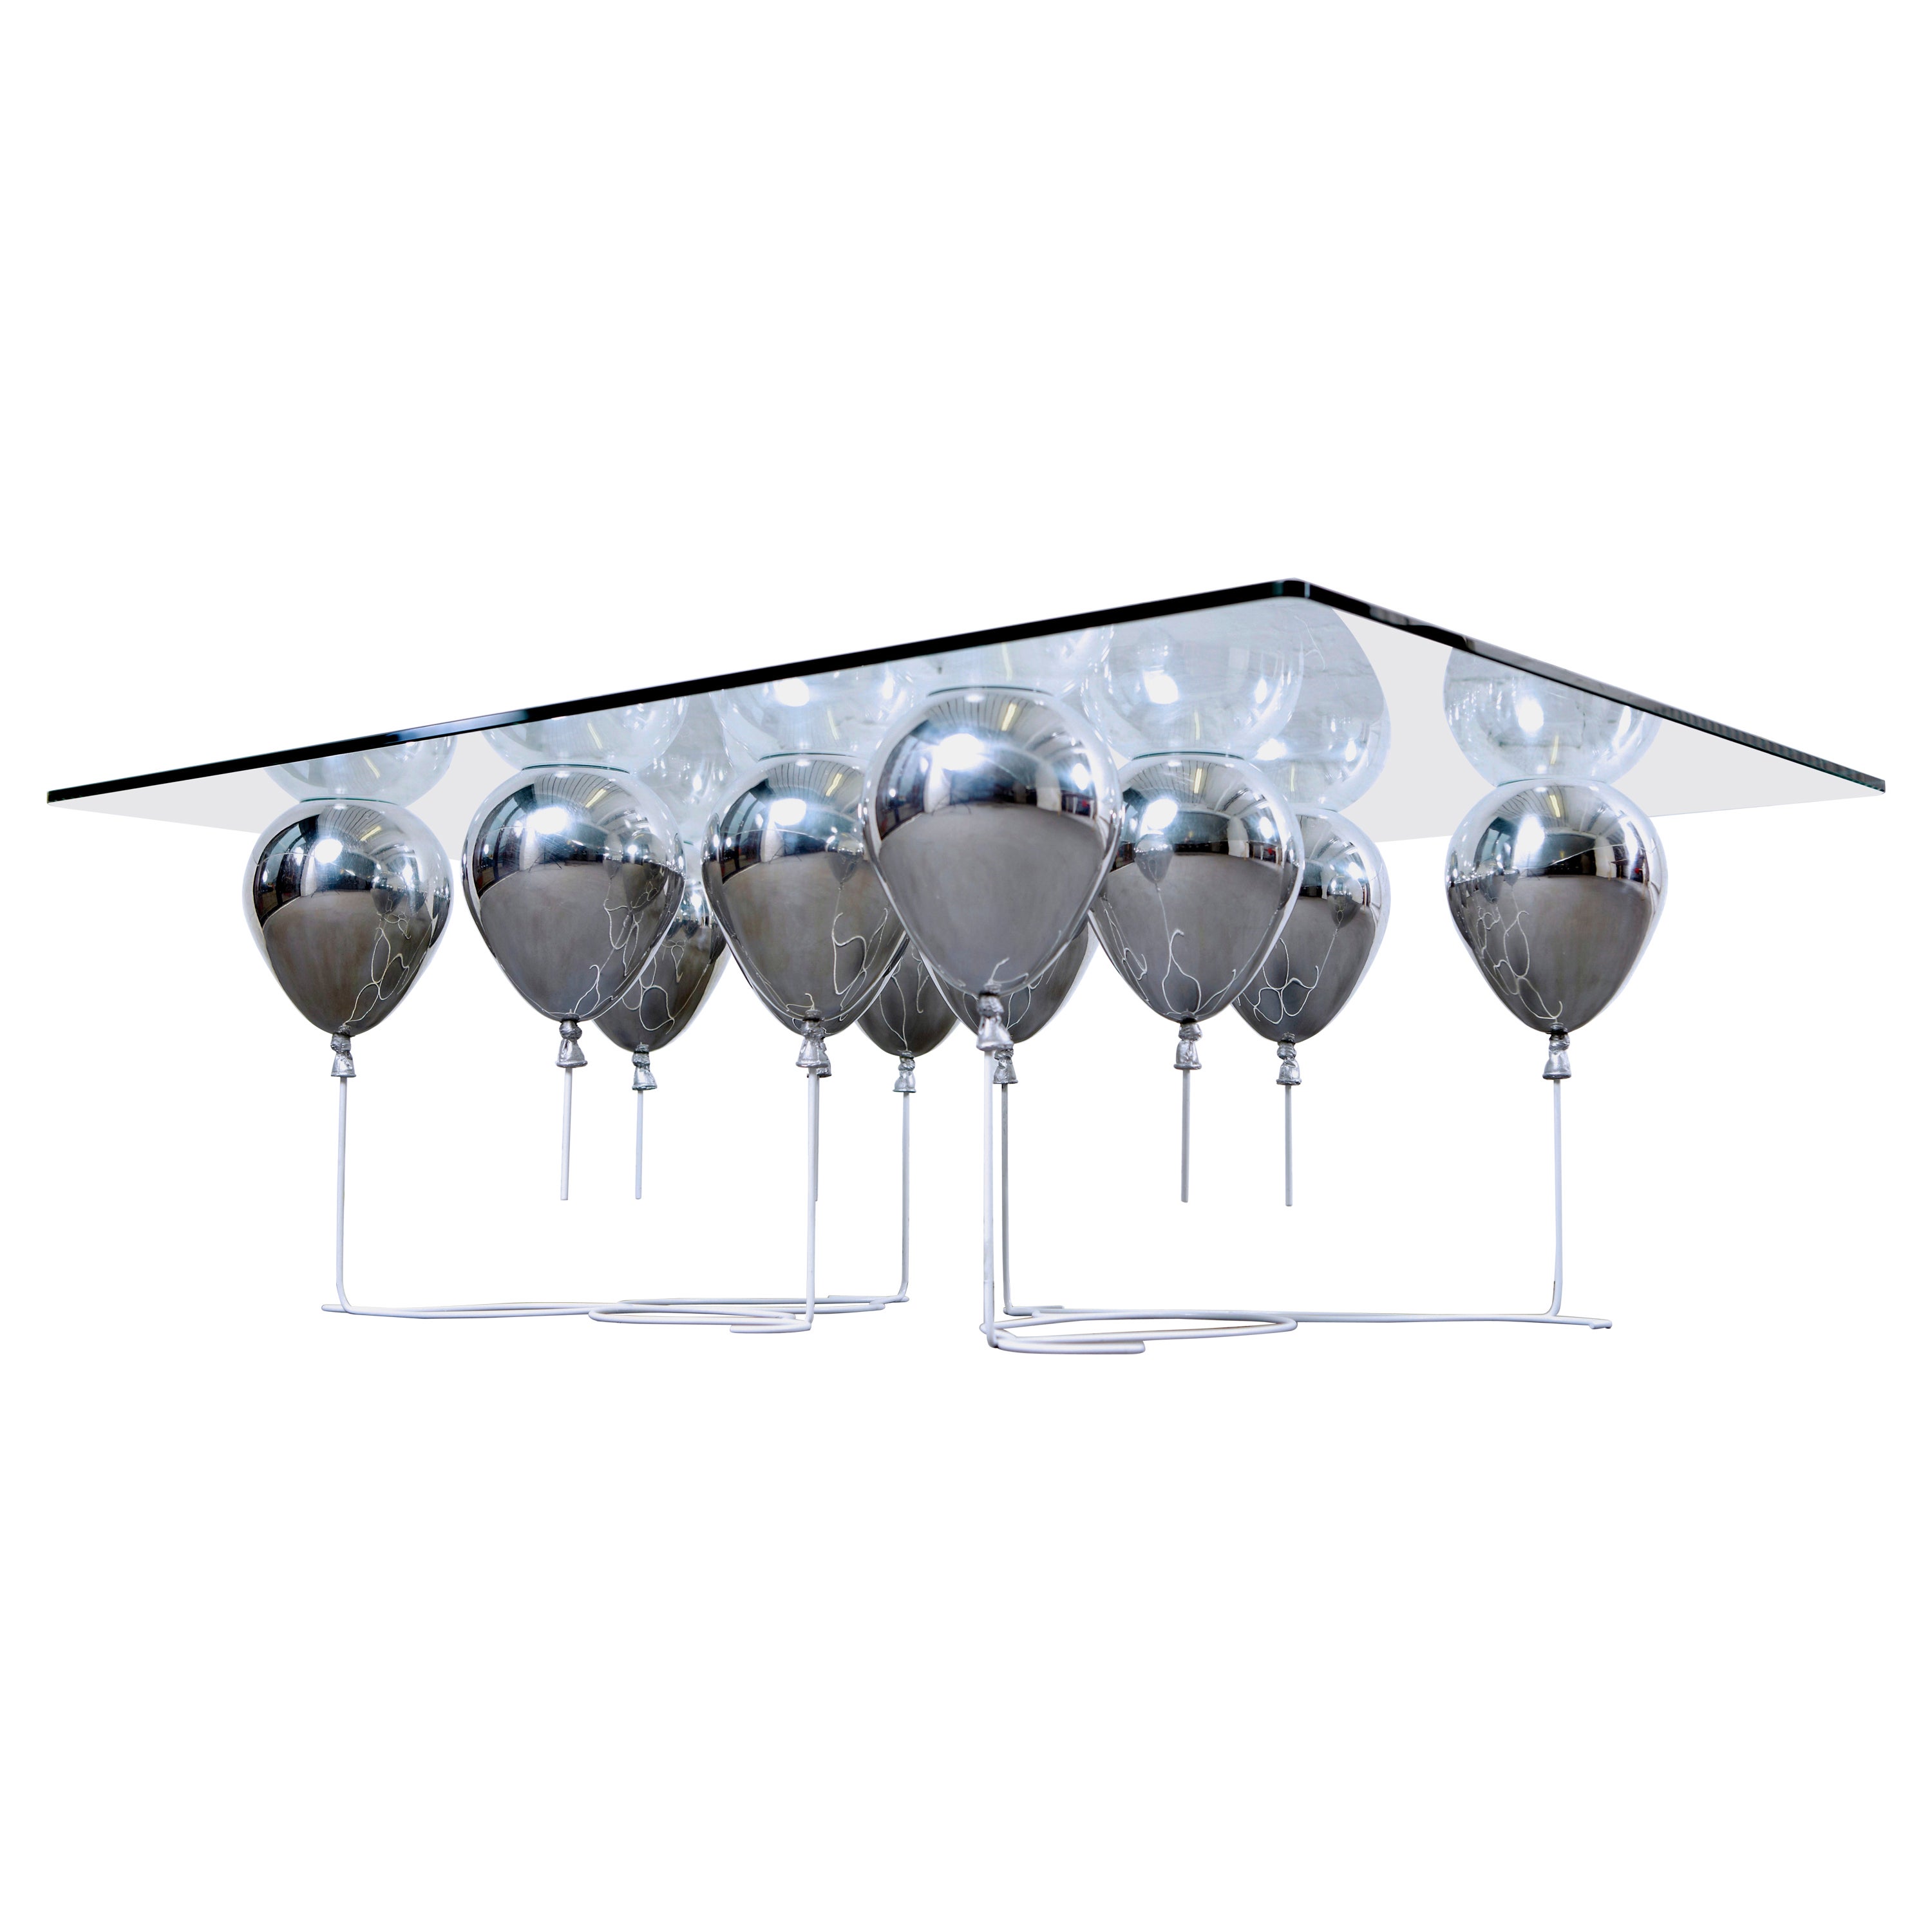 Modern Rectangular Coffee Table with White Legs and Silver Balloons